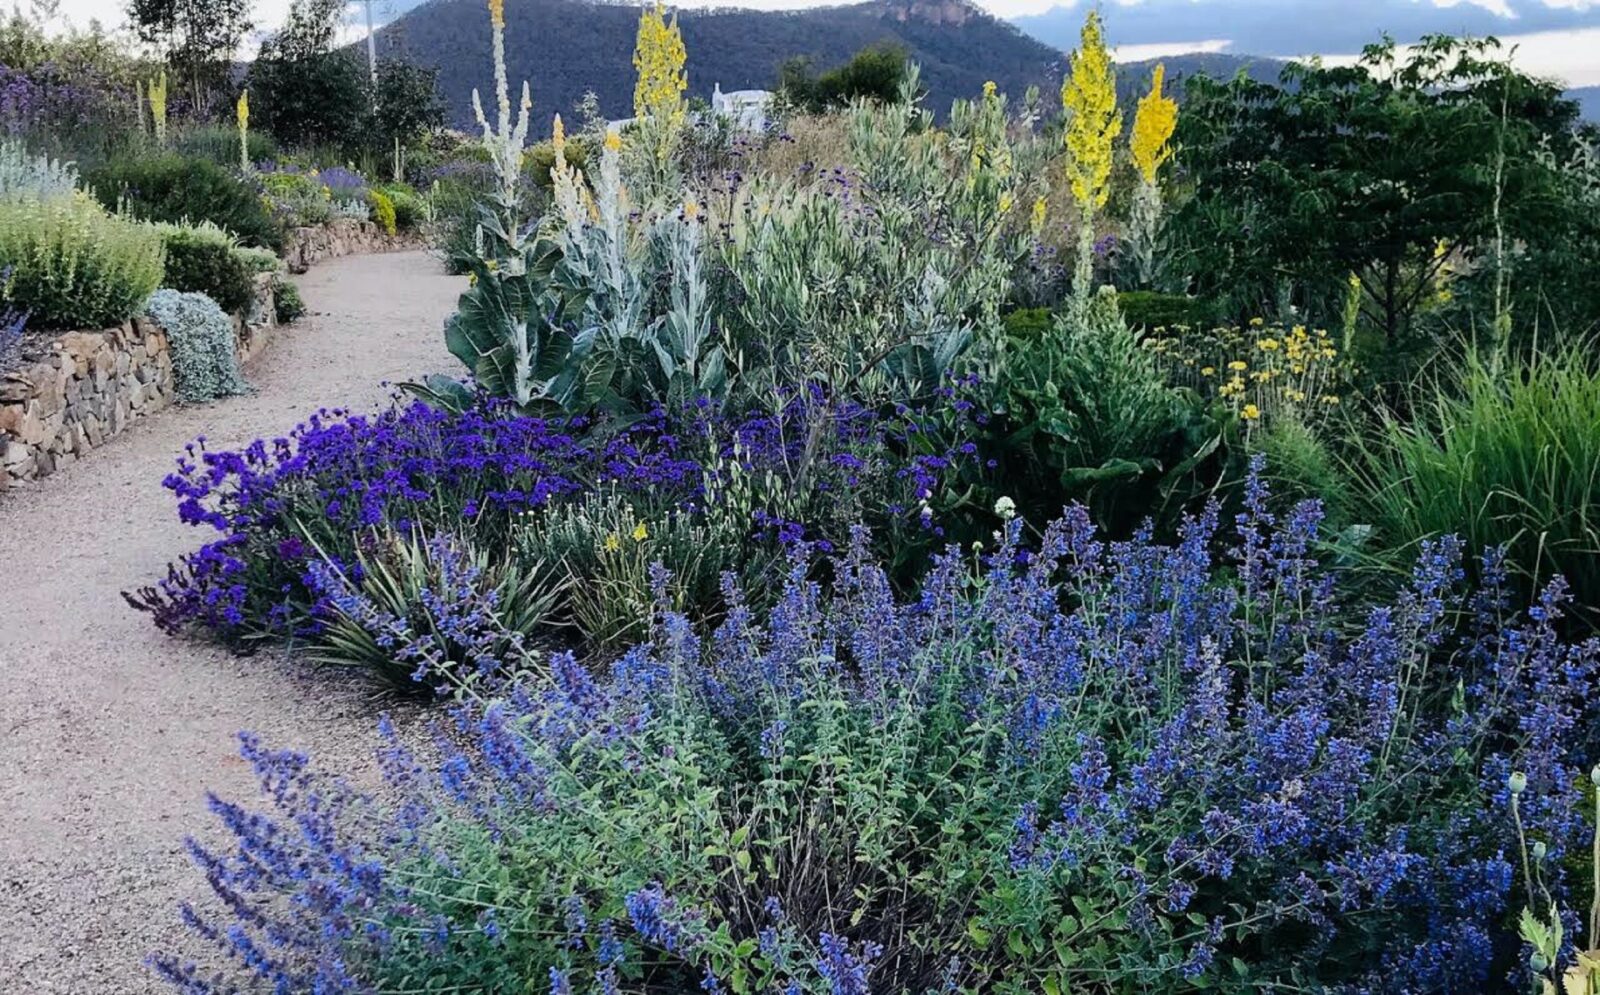 An outstanding garden full of many rare and unusual plants. Stunning view of the Blue Mountains